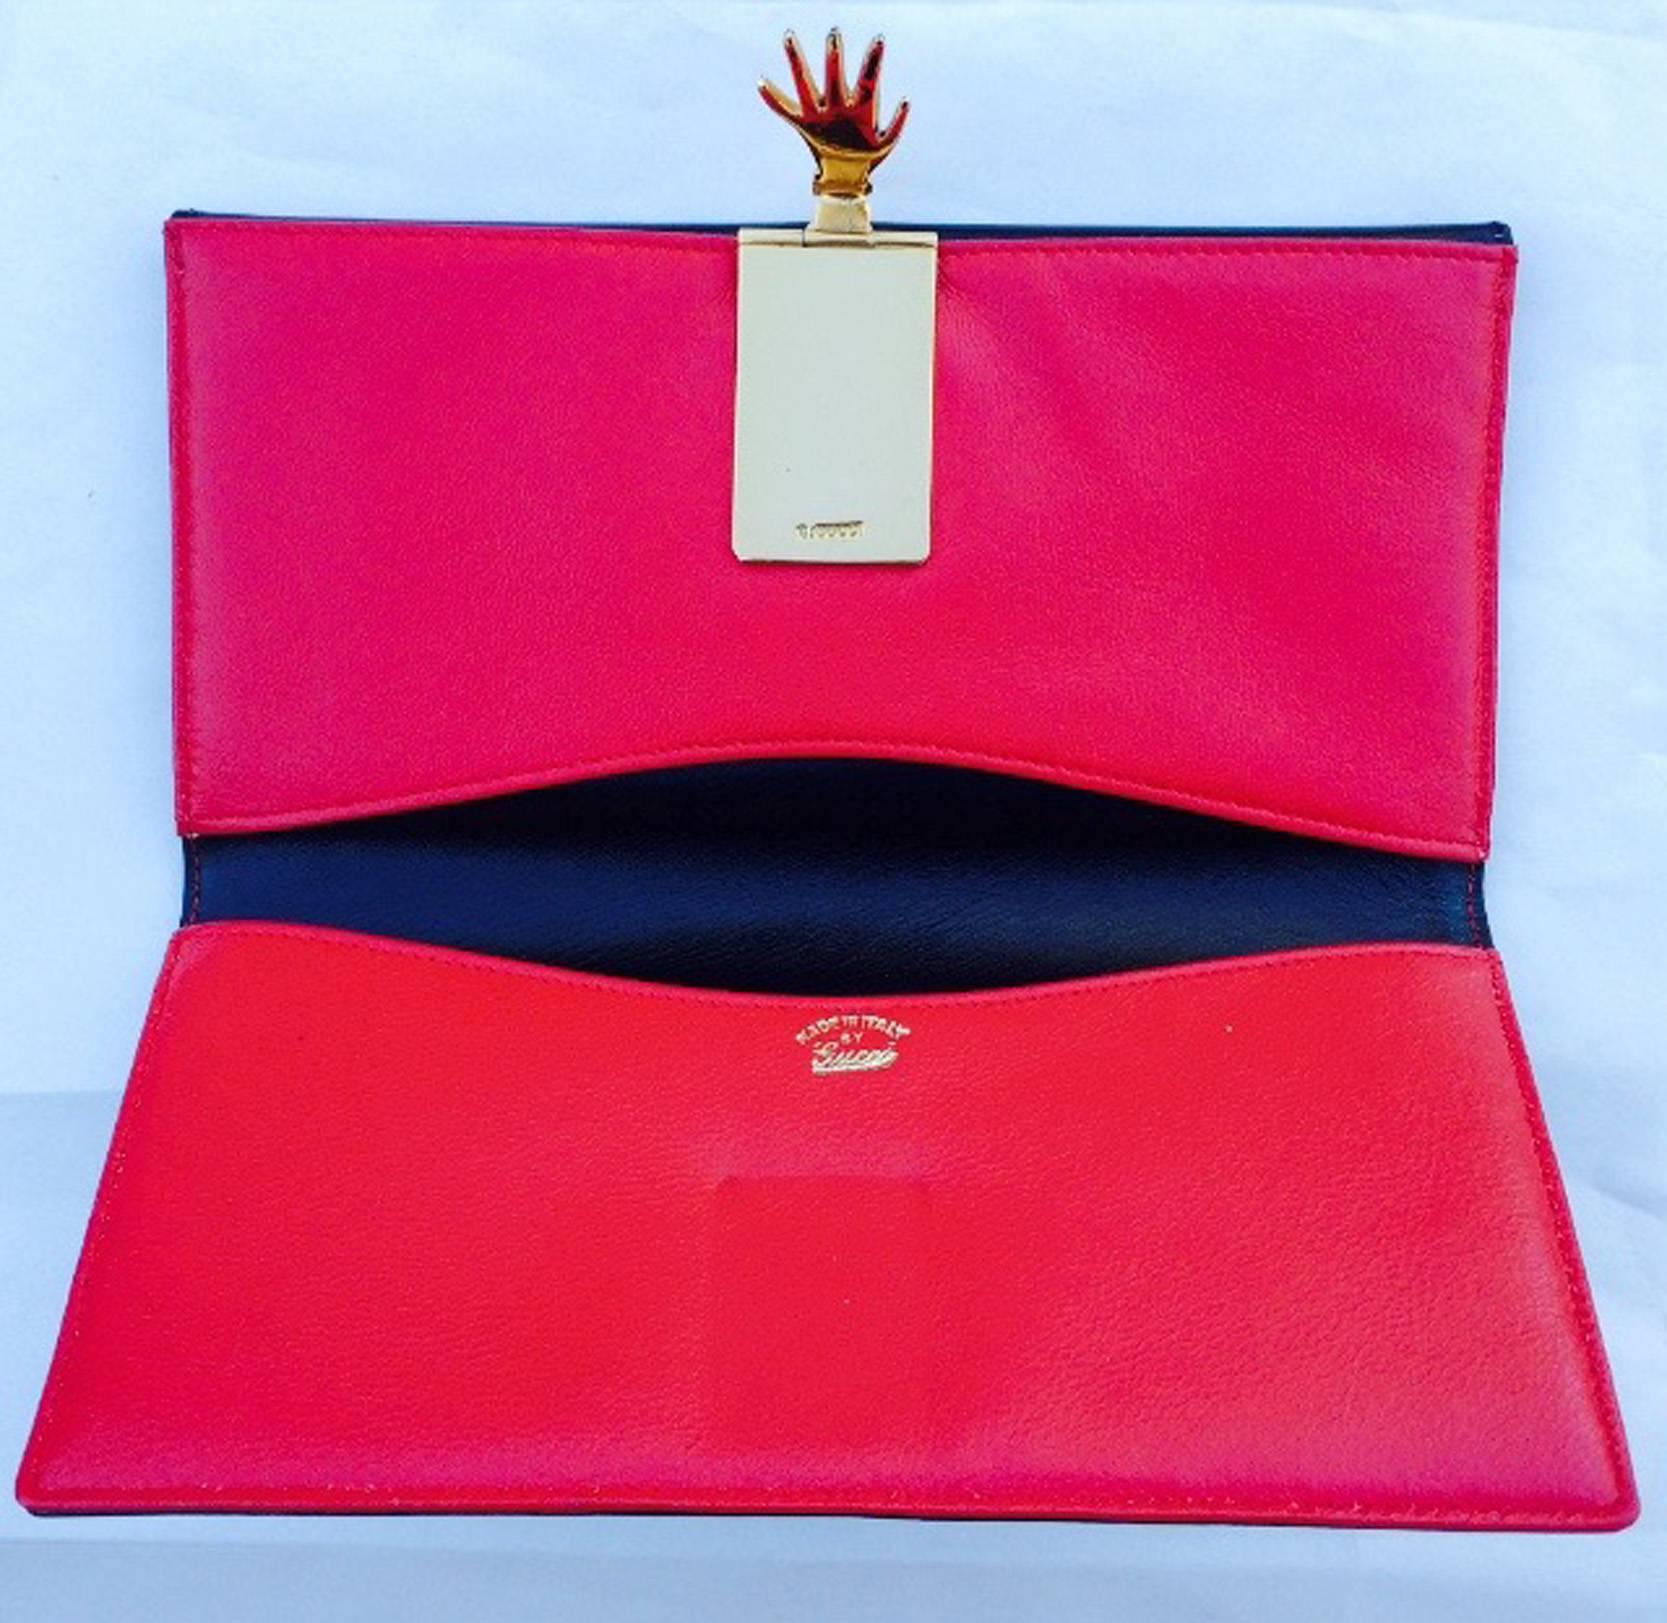 A fine vintage Gucci hand clutch wallet. Authentic calf leather item dyed a jet black exterior with a vivid red interior. Sculpted 